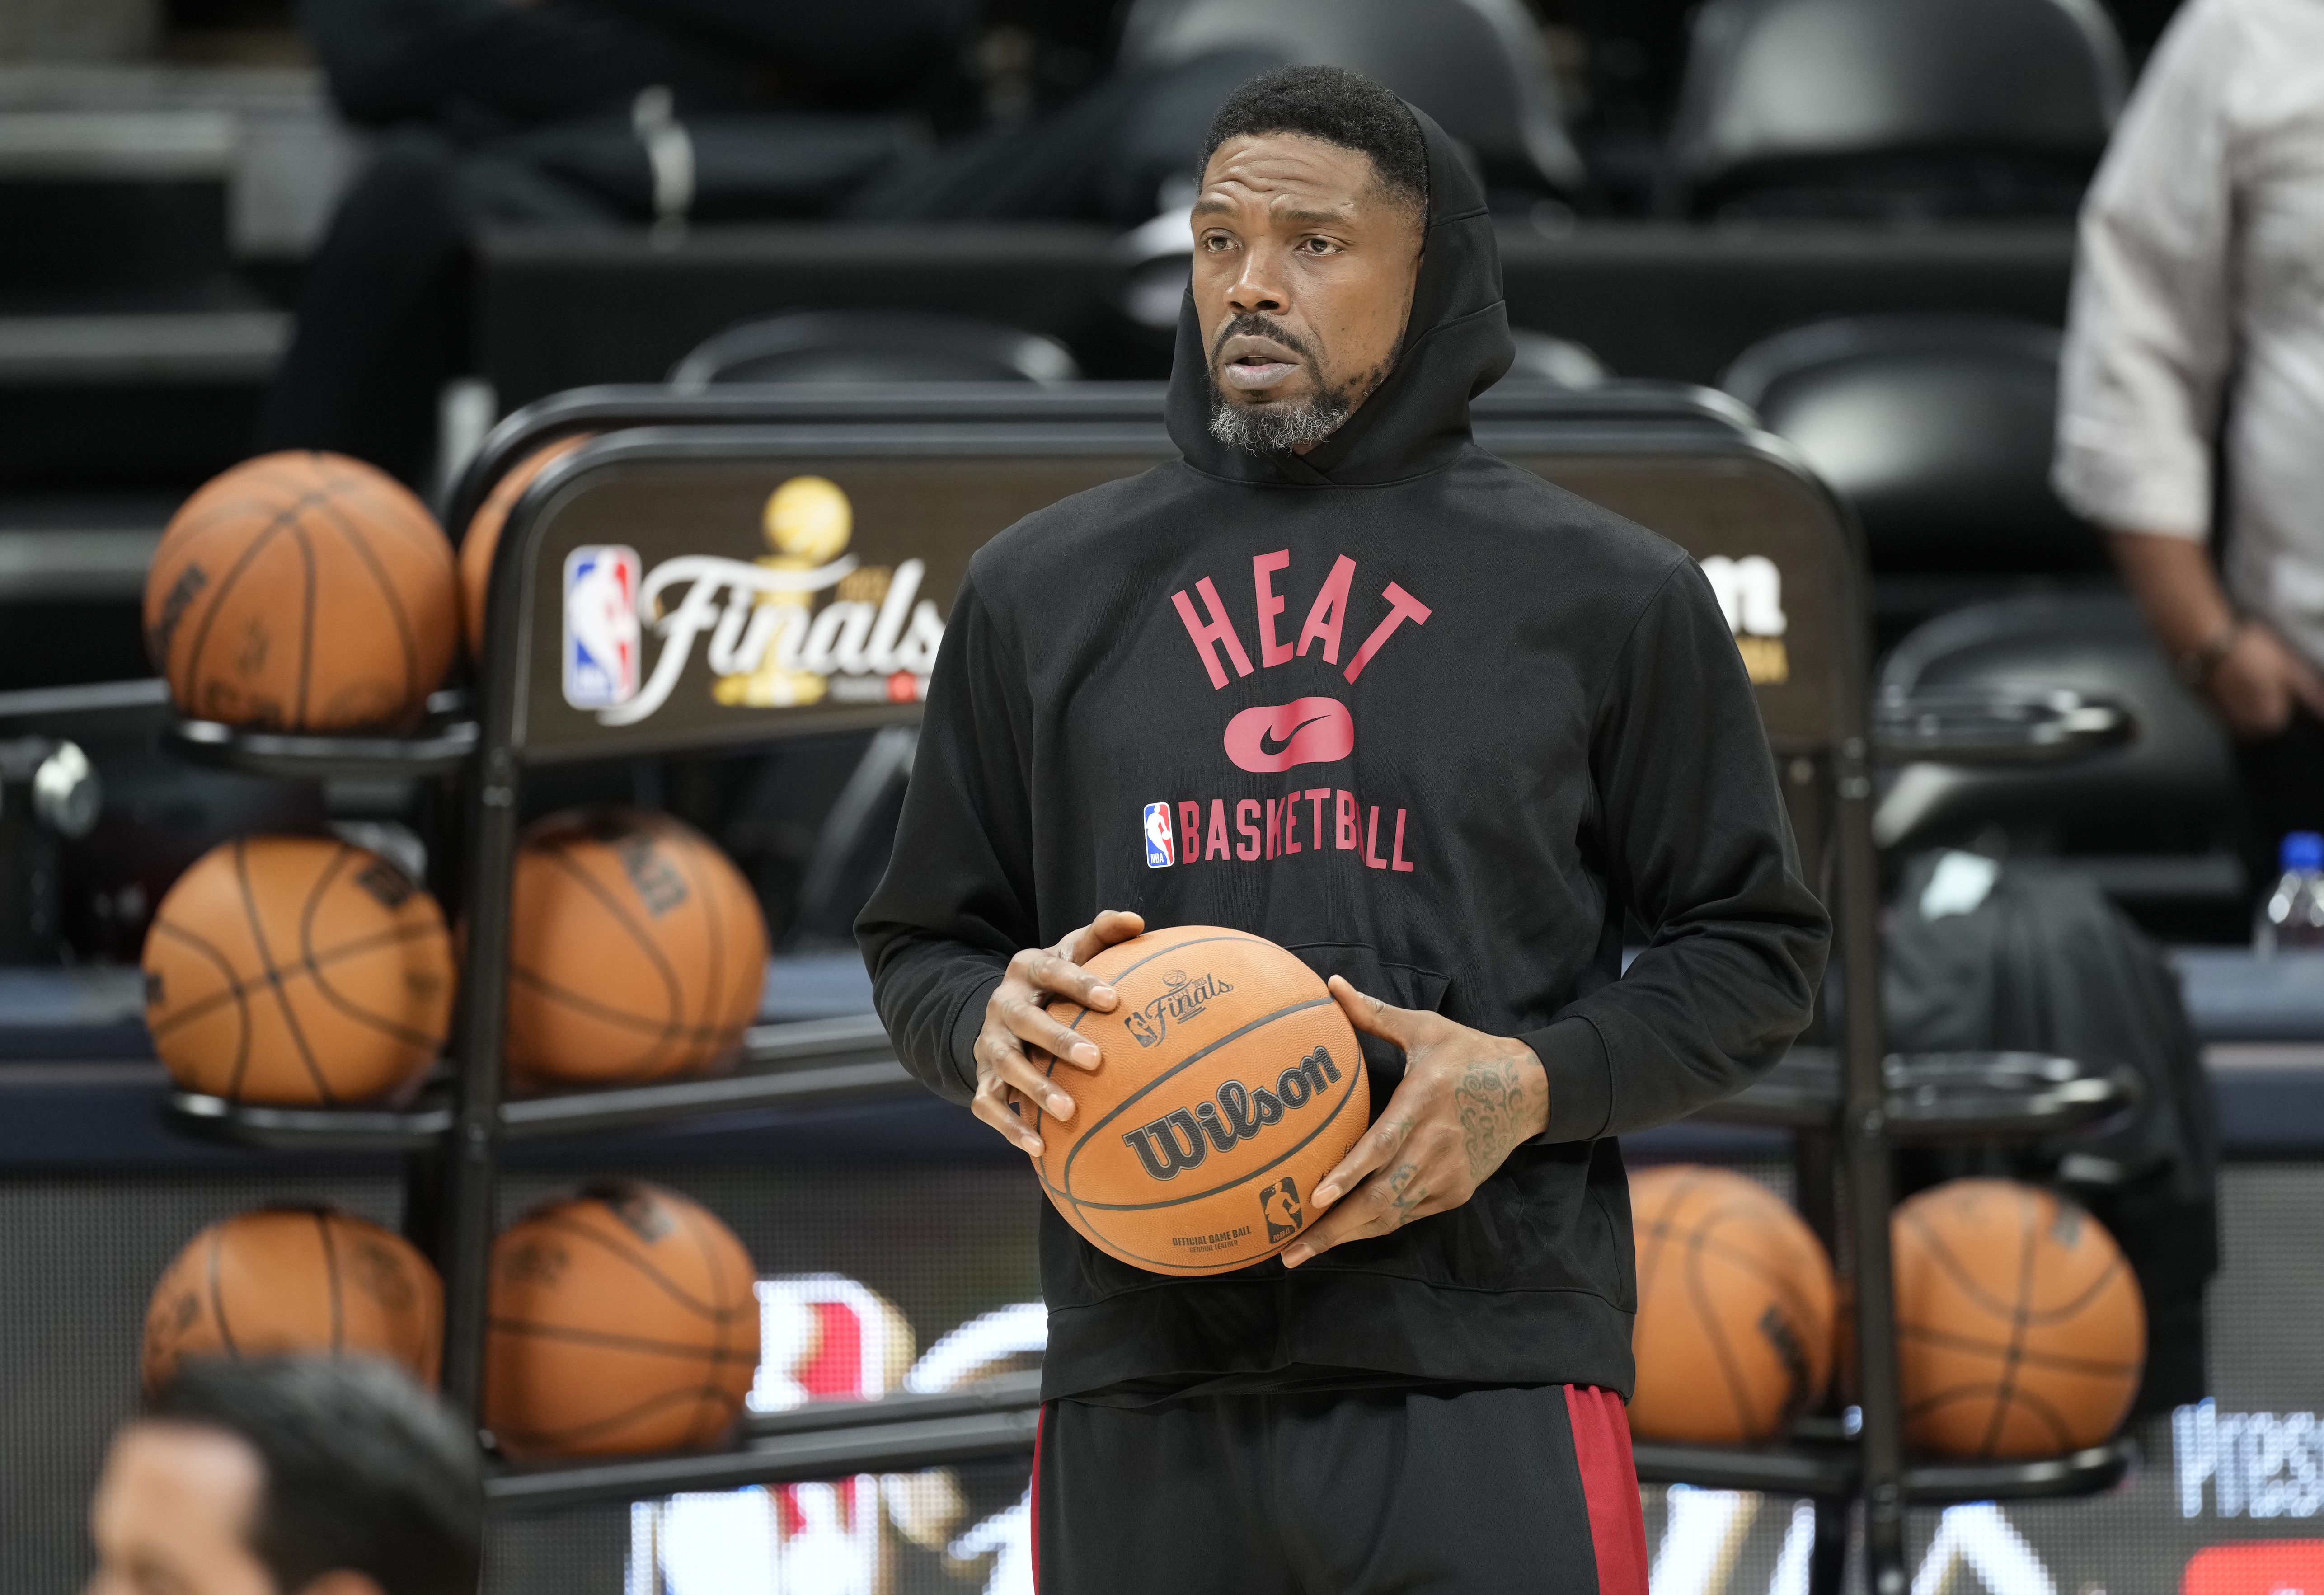 Udonis Haslem returning to Heat for 18th season